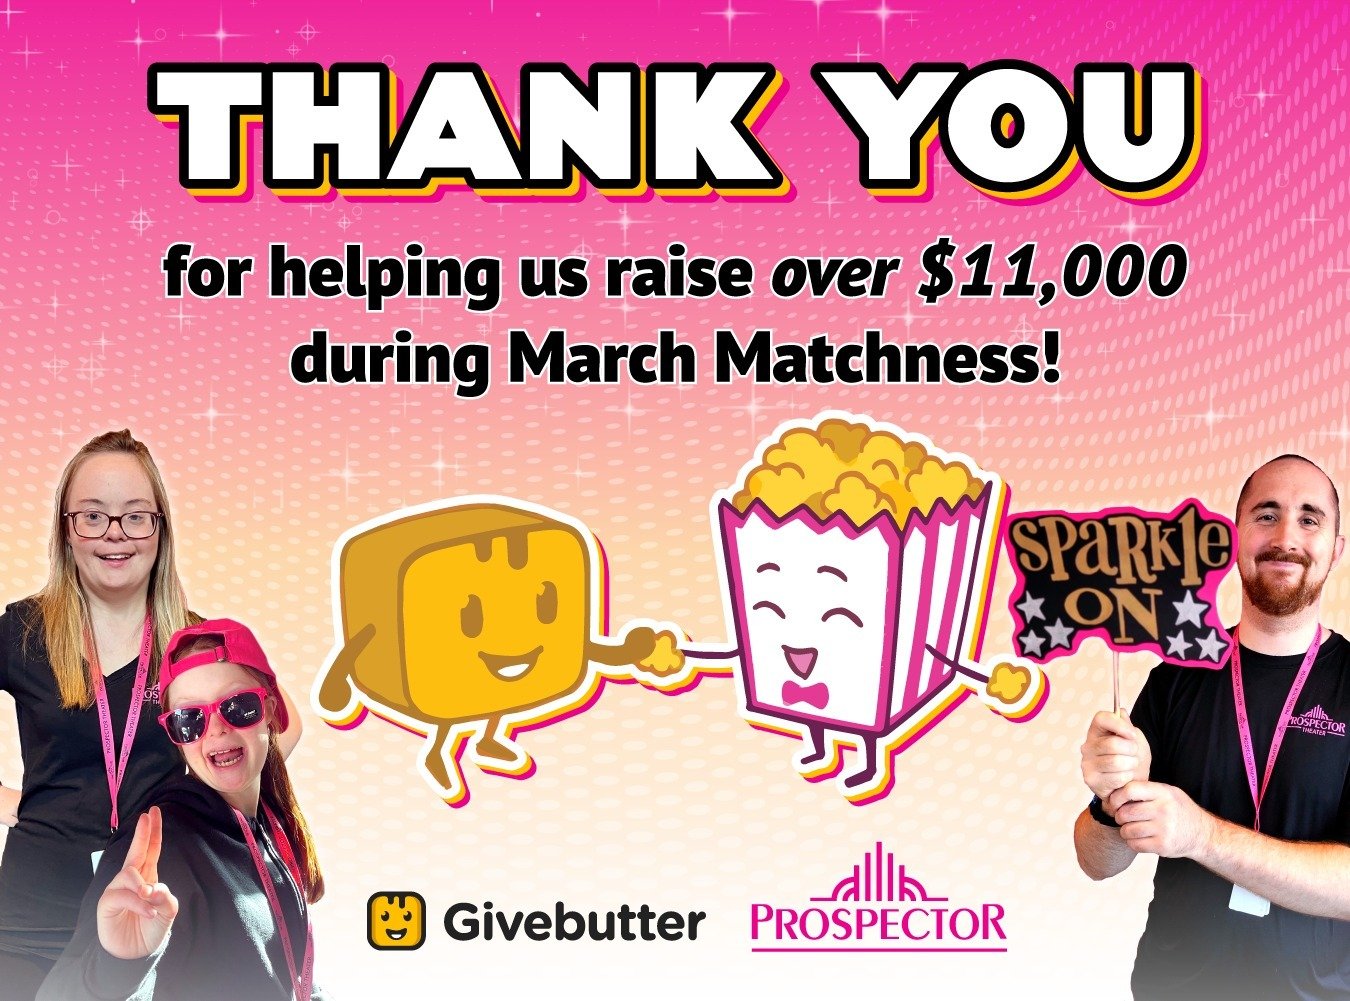 Thank you to all of our donors who helped us raise over $11,000 during March Matchness! Sparkle on! 🍿🎉💖 ⁠
.⁠
.⁠
.⁠
.⁠
.⁠
Graphic caption: Prospects smile in front of a pink sparkly background.  The Givebutter logo and a bag of popcorn smile and sh